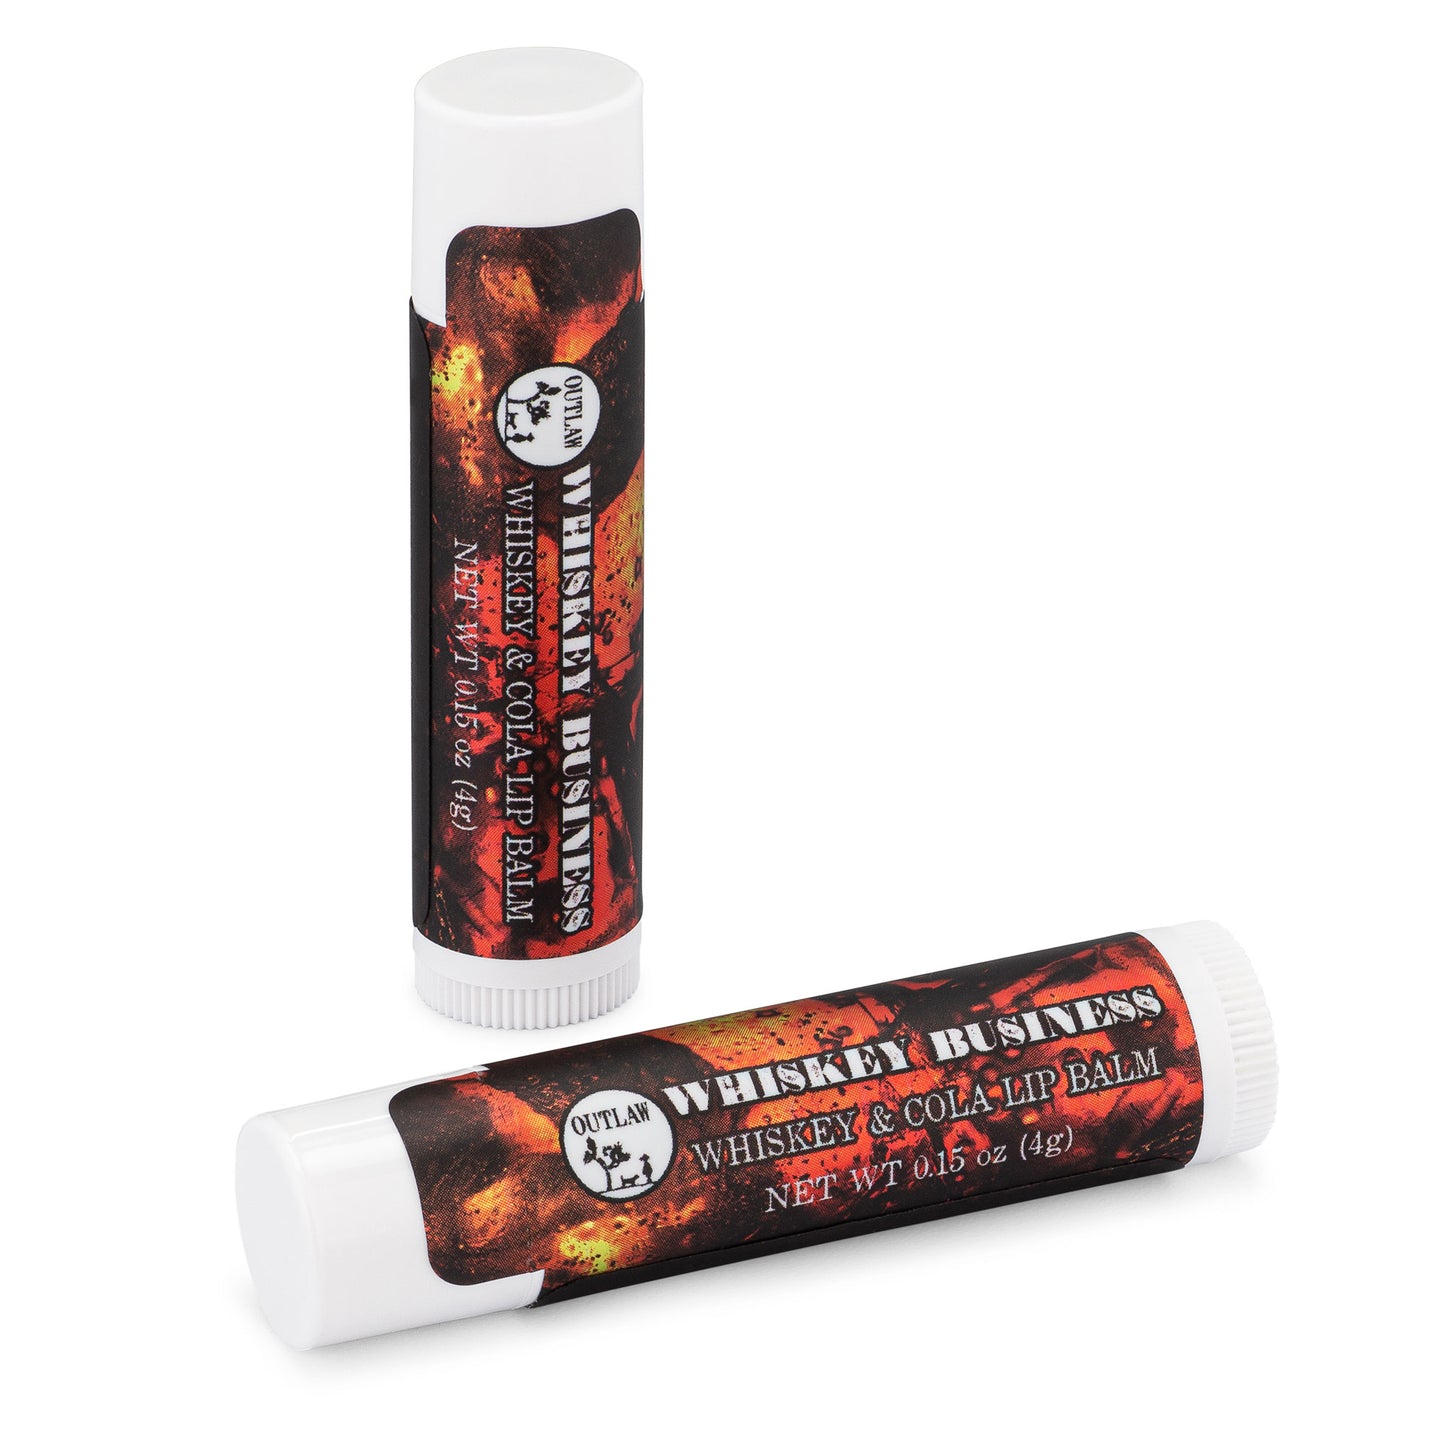 Outlaw Whiskey Business whiskey flavored lip balm